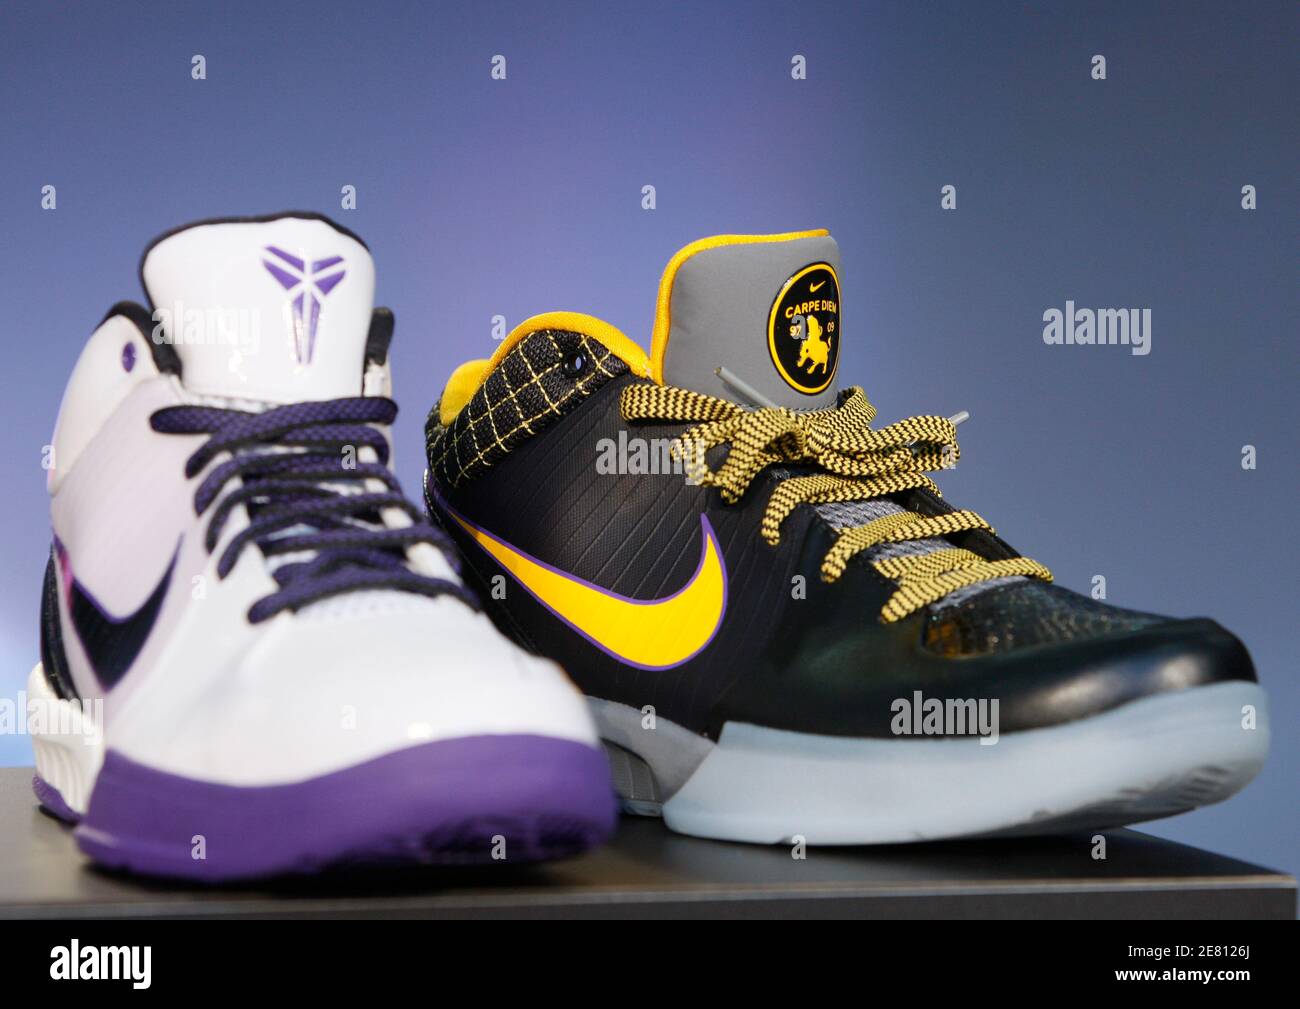 Angeles Lakers NBA star Kobe Bryant's new Nike Kobe IV basketball shoe is shown in Los Angeles, December 11, 2008. The shoe will be available for sale in China from